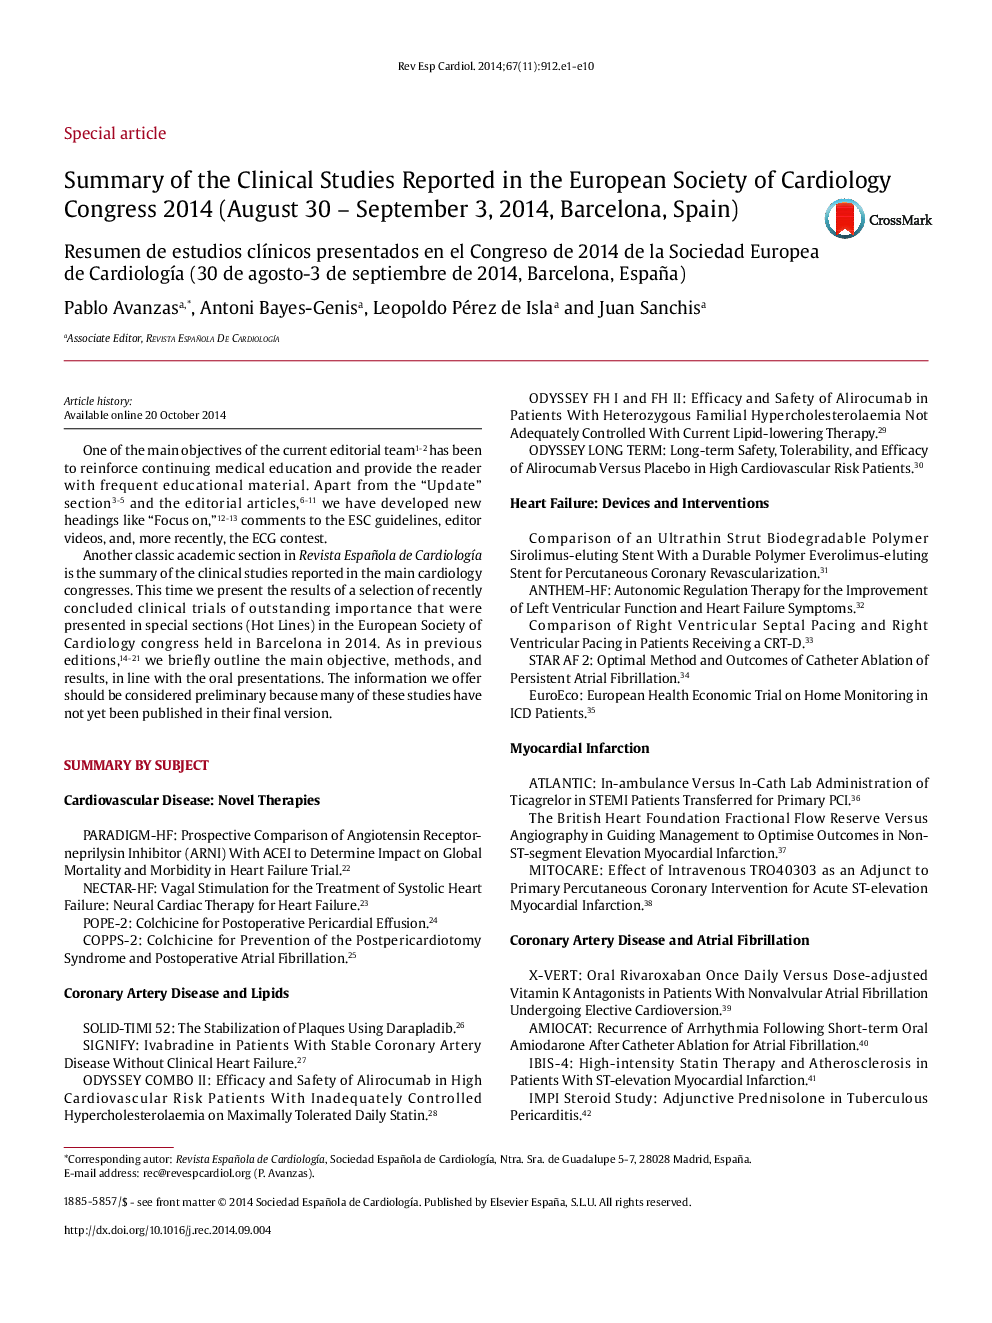 Summary of the Clinical Studies Reported in the European Society of Cardiology Congress 2014 (August 30 - September 3, 2014, Barcelona, Spain)